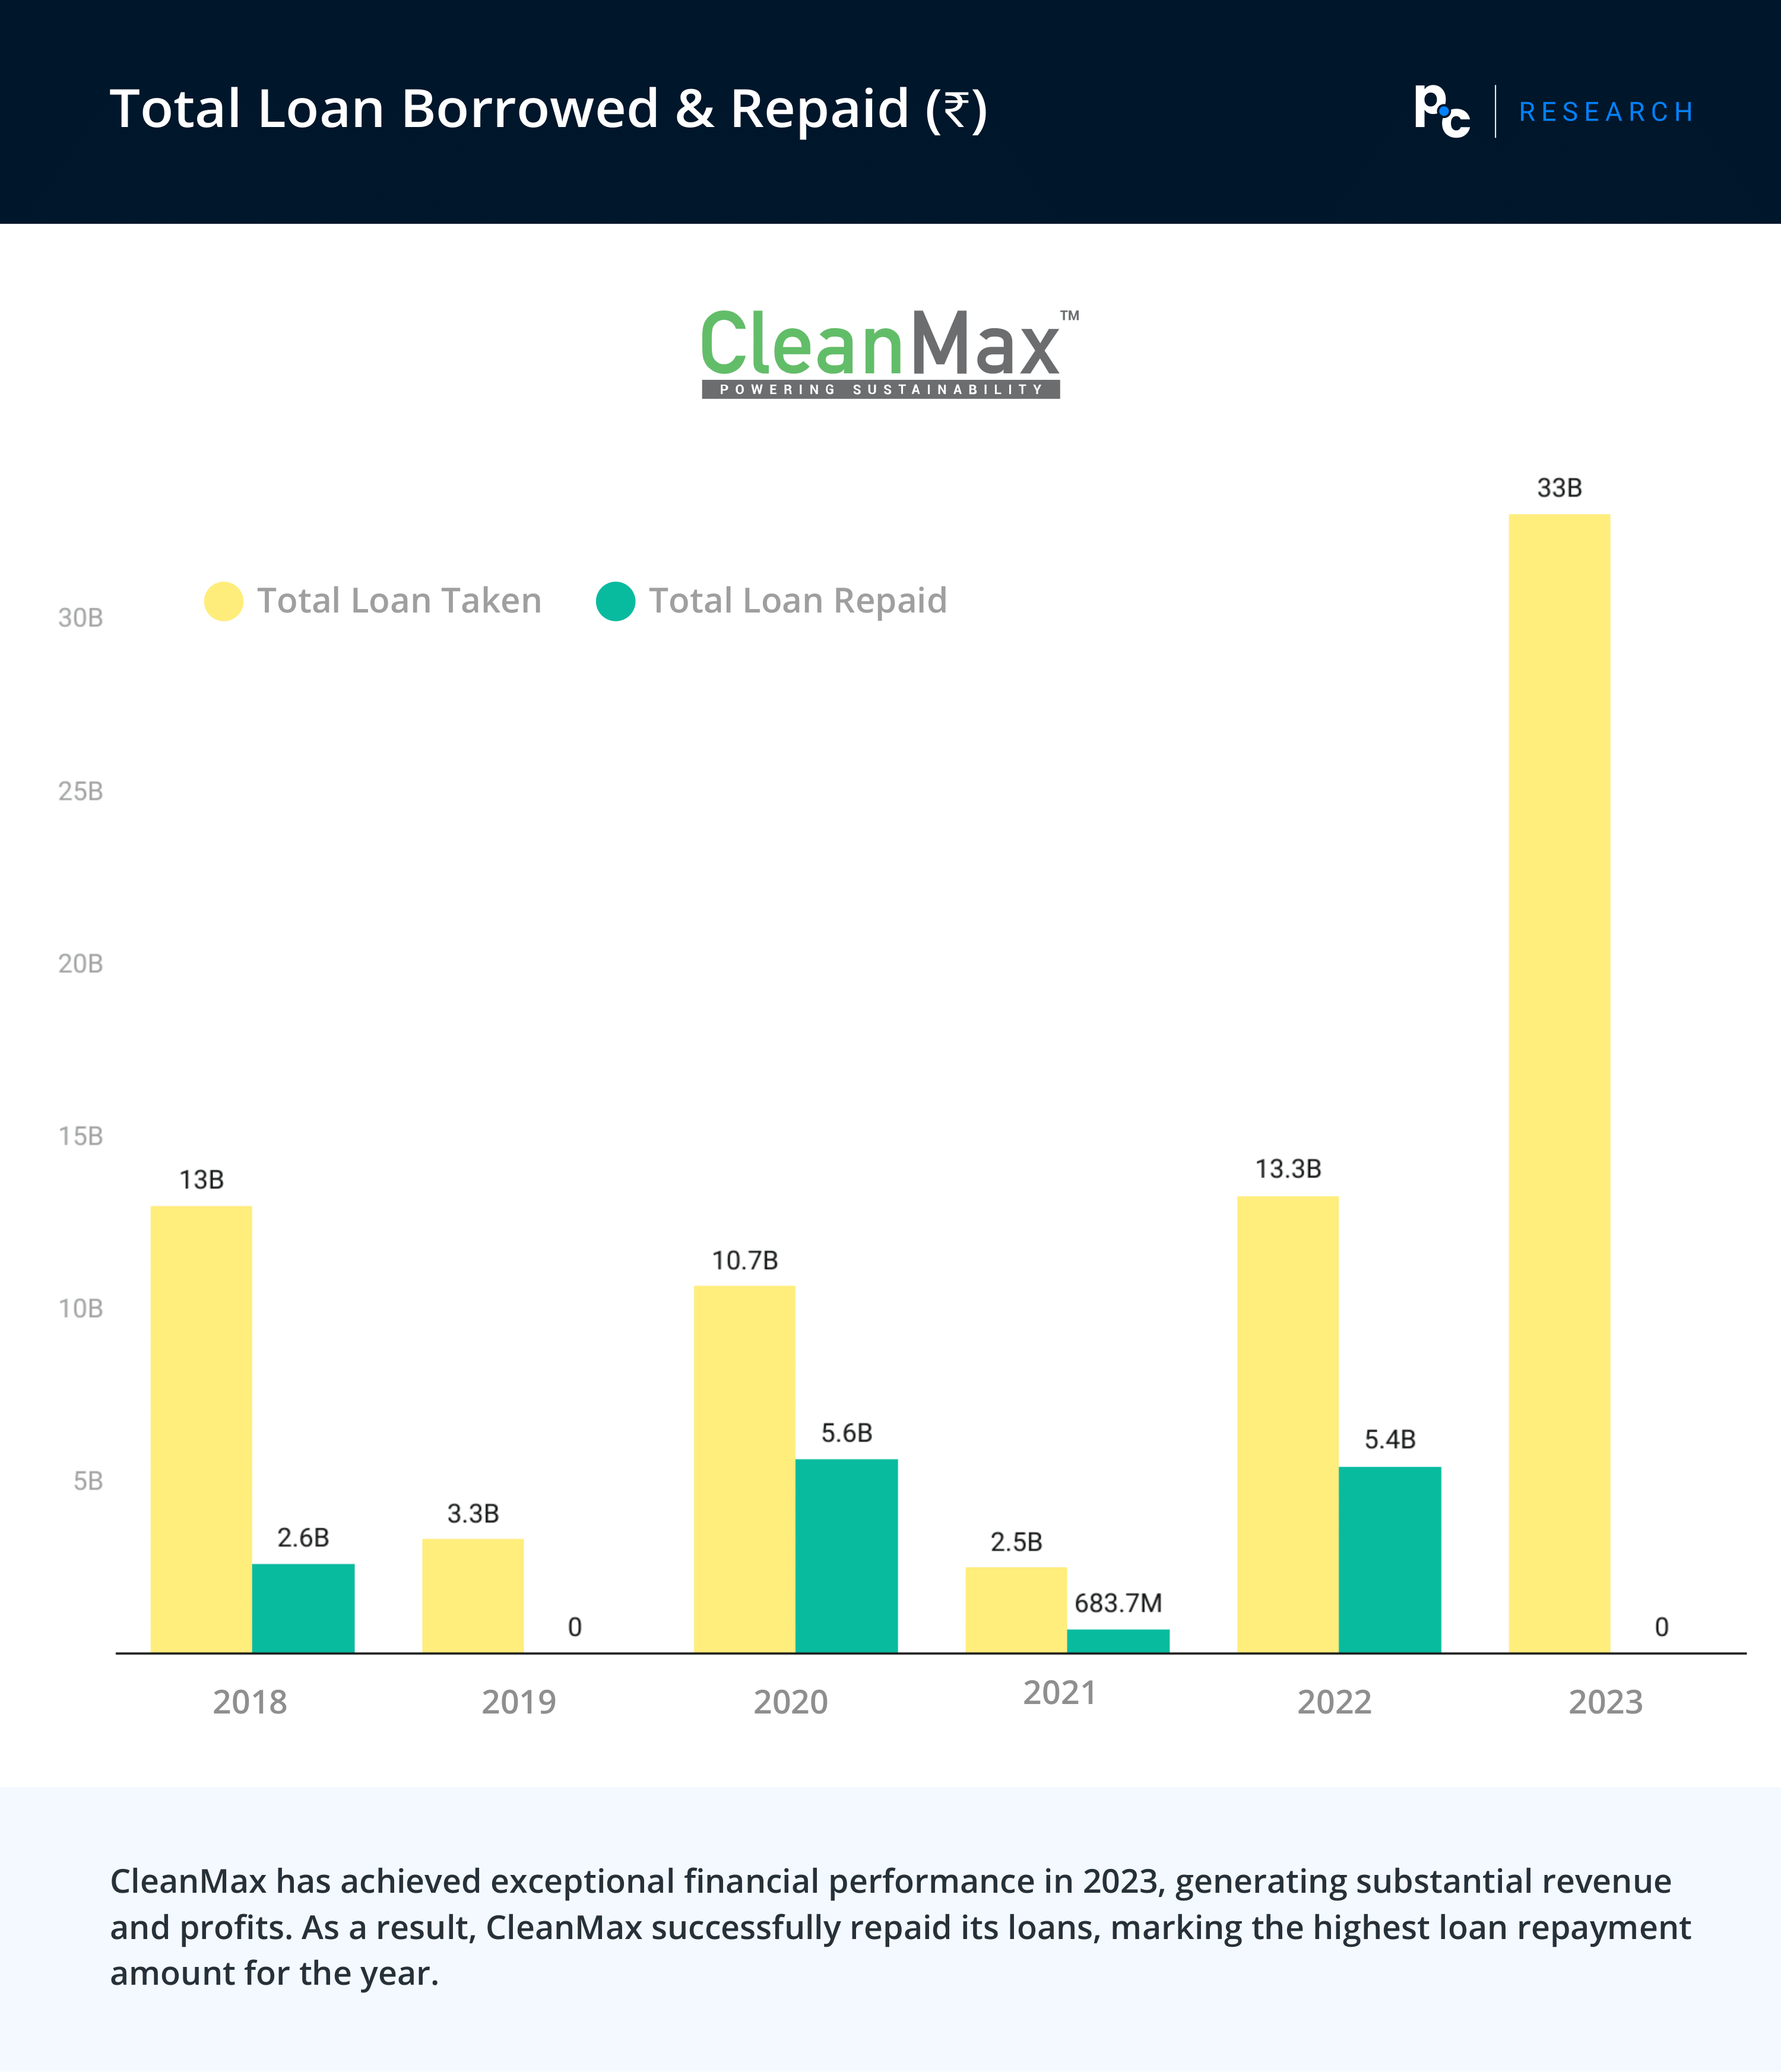 CleanMax - Total Loan Borrowed & Repaid (₹).

CleanMax has achieved exceptional financial performance in 2023, generating substantial revenue and profits. As a result, CleanMax successfully repaid its loans, marking the highest loan repayment amount for the year.